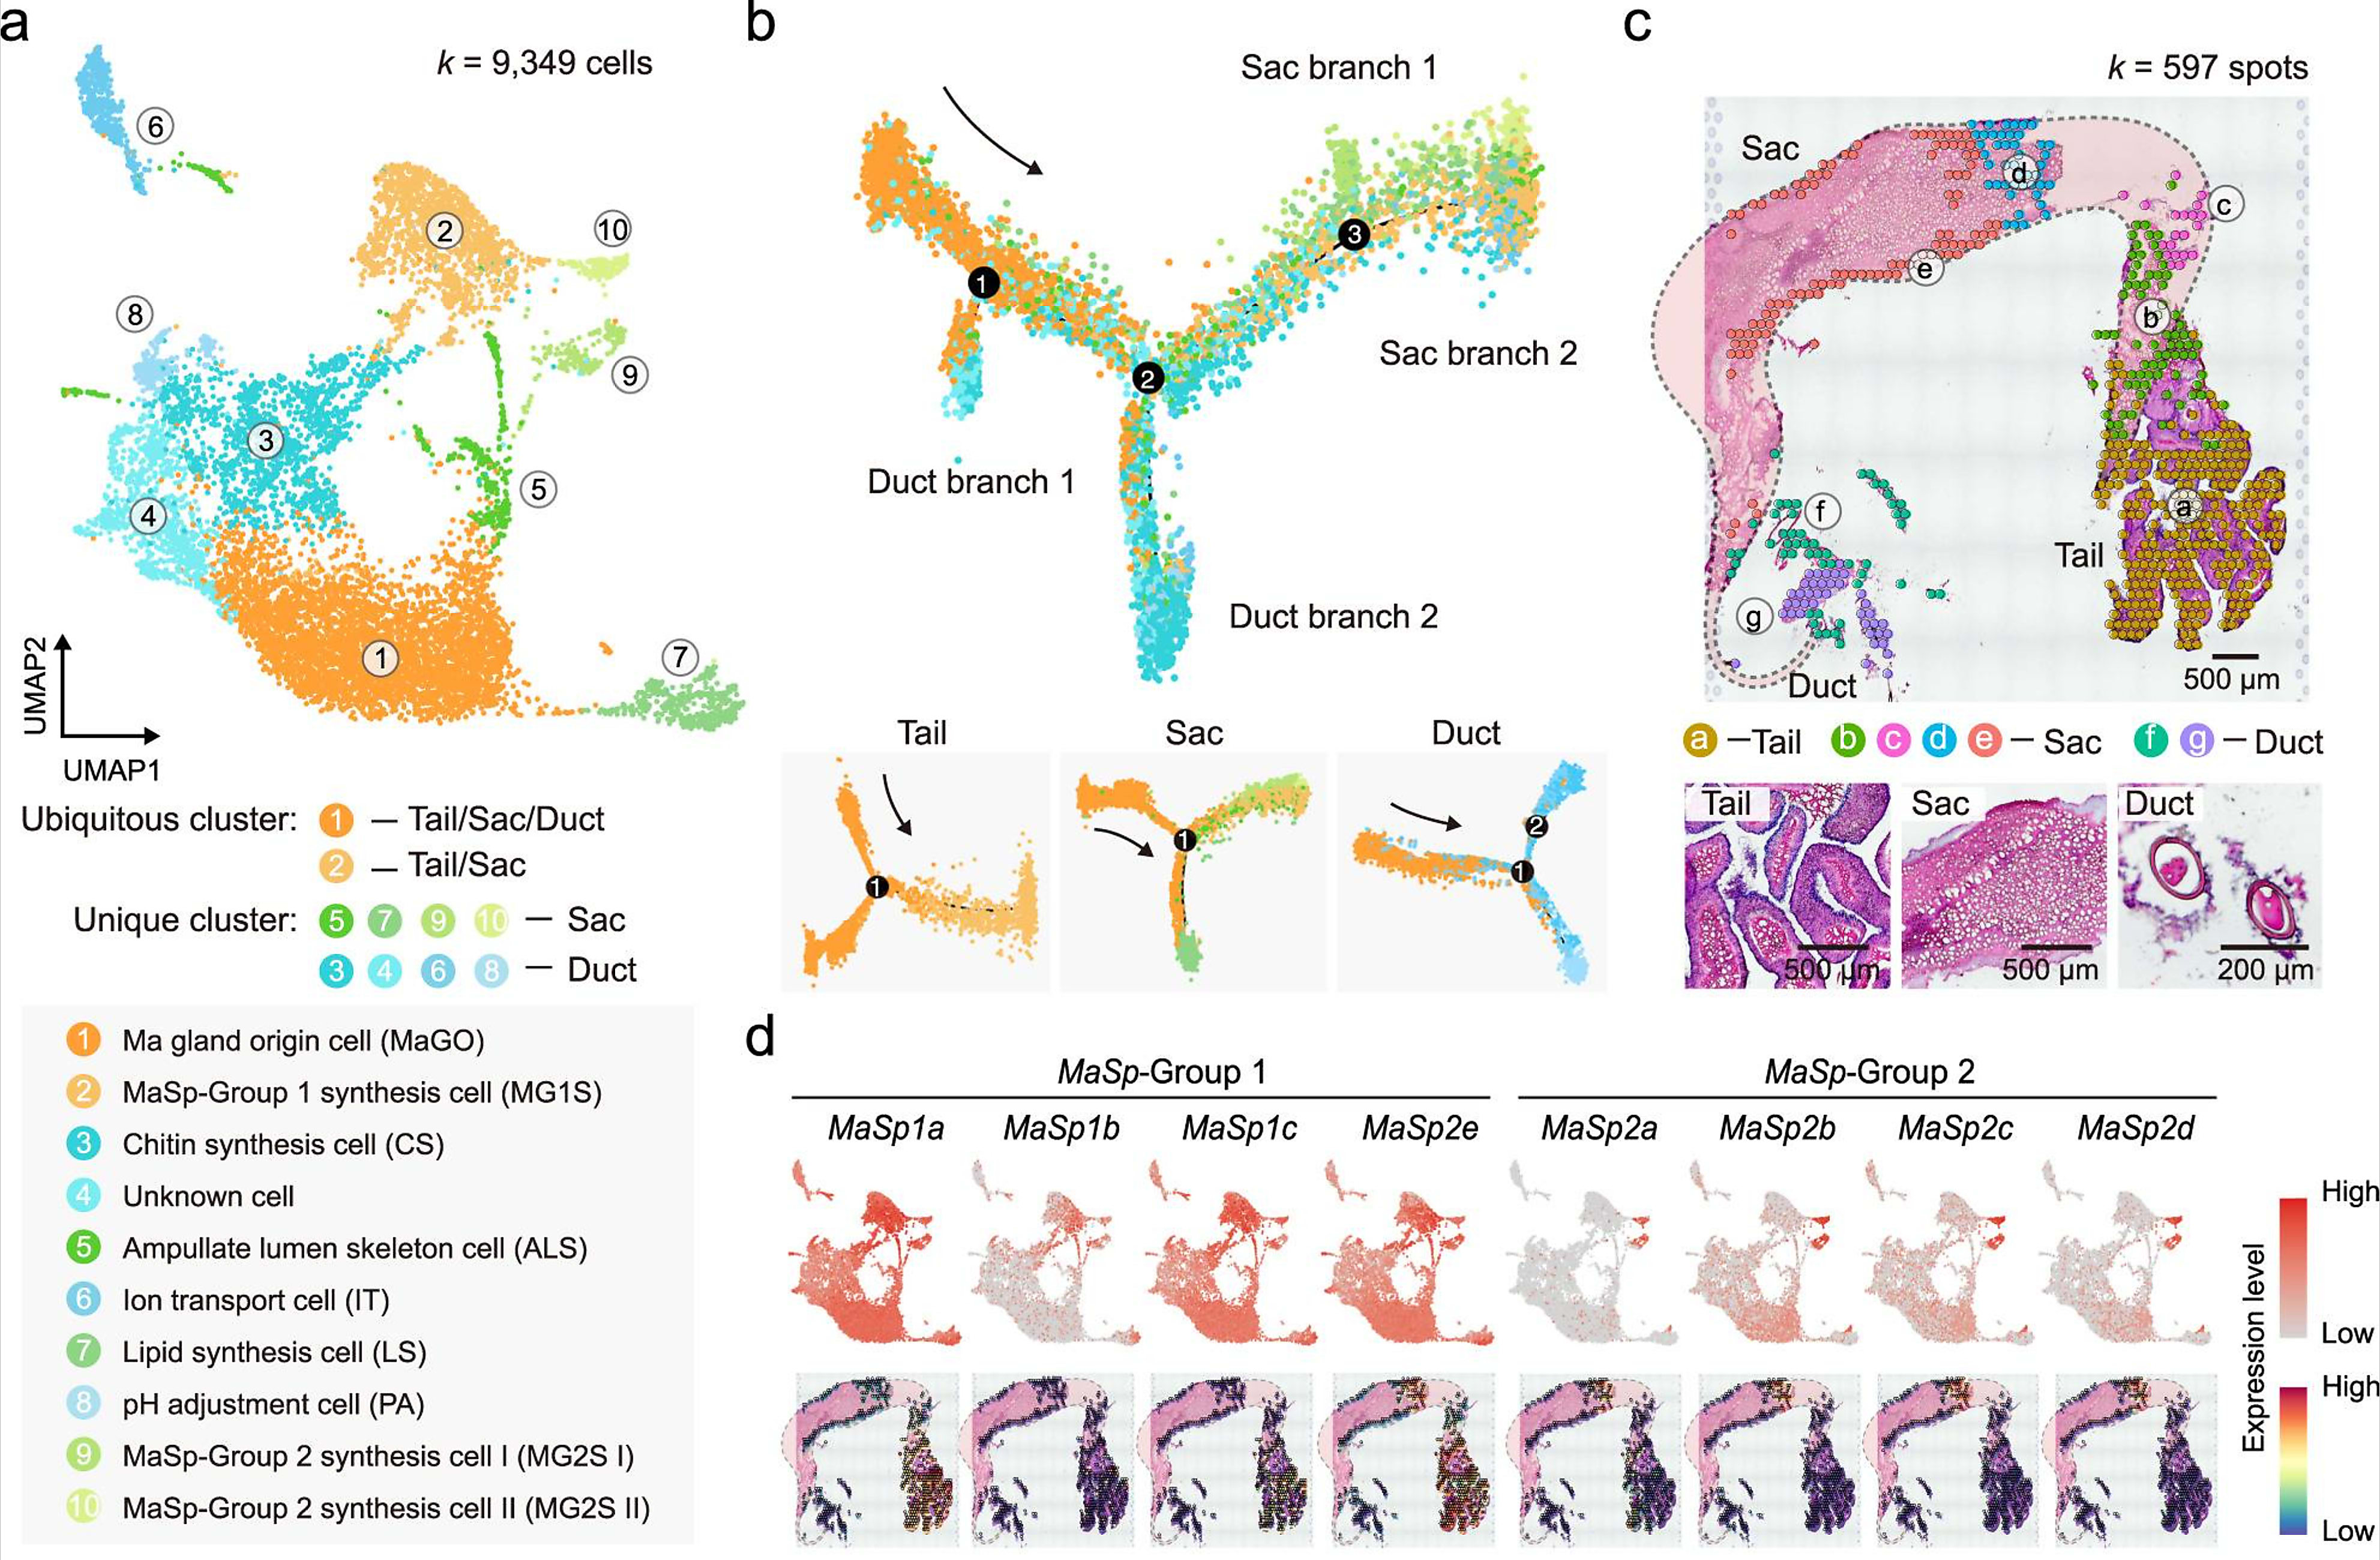 Visualizations of single cell and spatial transcriptomics (ST) data, modified from Figure 4a-d from Hu W, et al. (1). a. Analysis of cell types in the Ma gland and their grouping into ten cell clusters. The numbers in white-filled circles indicate cell clusters. b. Pseudotime trajectory of all 9,349 Ma gland cells. Each dot indicates a single cell, color-coded by the cluster as in (a). The numbers in black-filled circles indicate branch sites. c. Hematoxylin and eosin staining of Ma gland sections and unbiased clustering of spatial transcriptomic (ST) spots. d. UMAP and ST feature plots of the expression of genes in the MaSp (silk protein-secreting) group. Creative Commons Attribution 4.0.